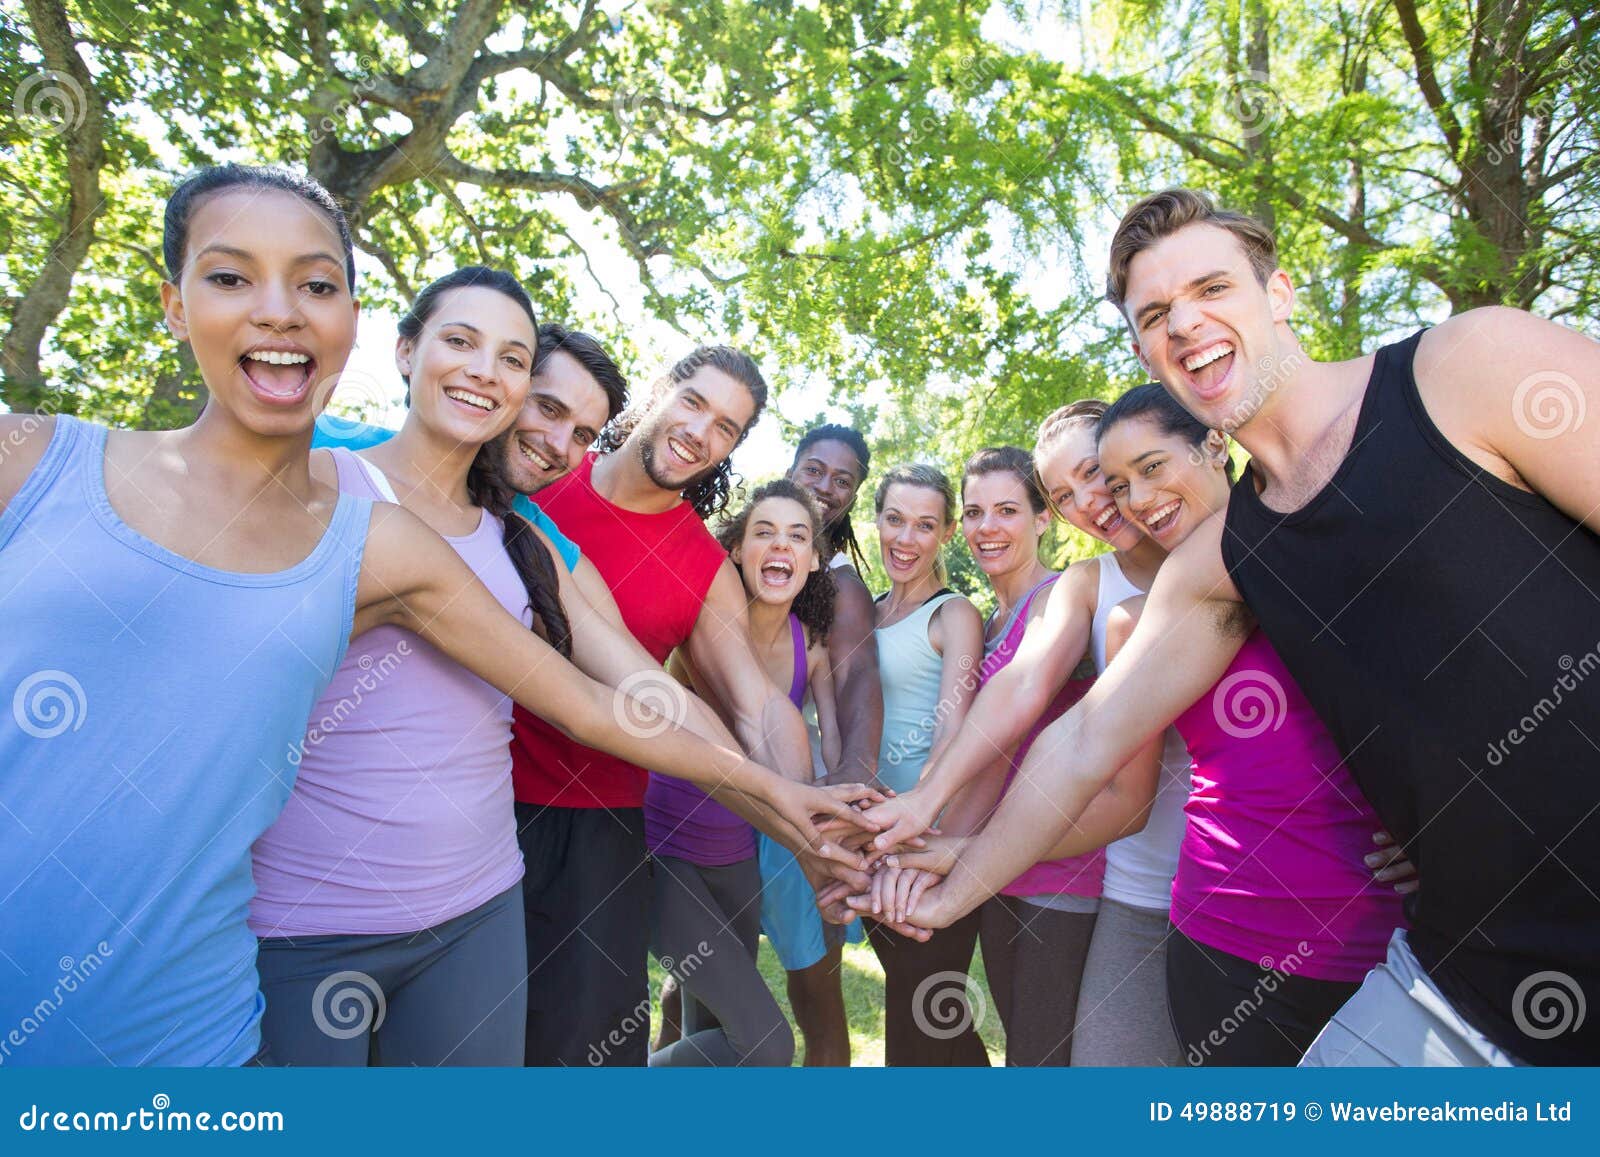 Fitness Group Putting Hands Together Stock Image - Image of large ...